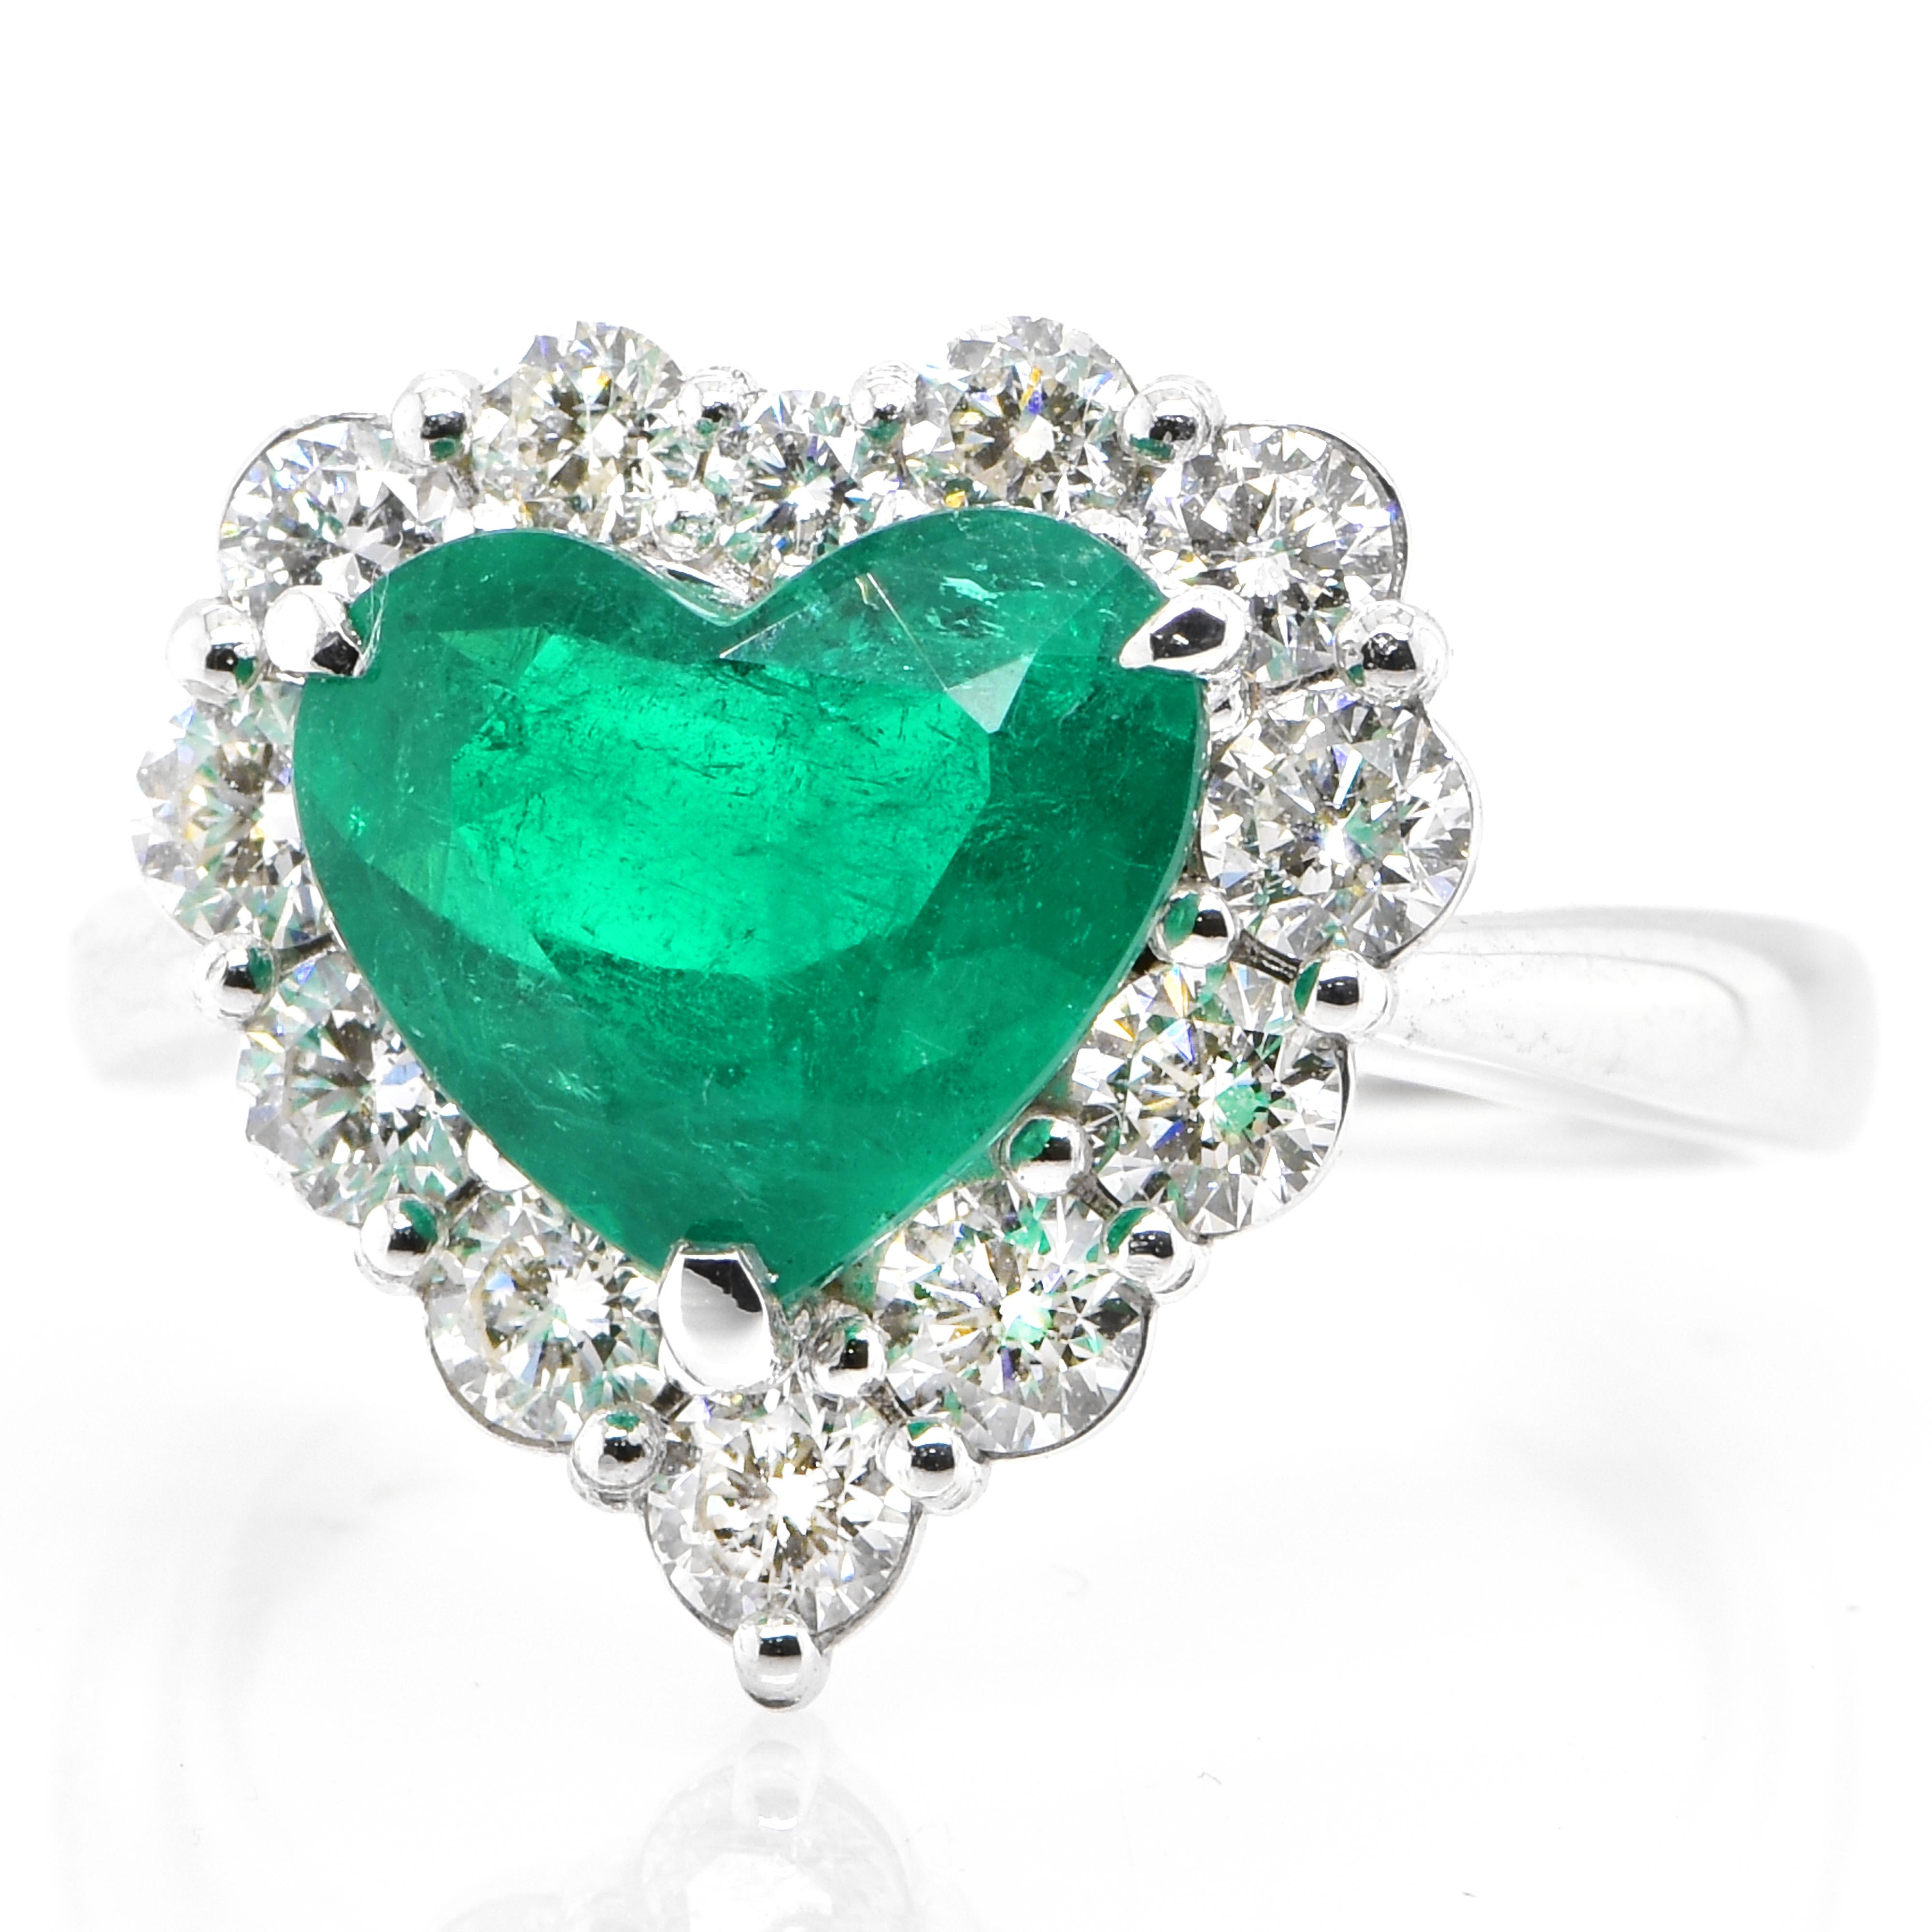 A stunning ring featuring a GIA Certified 2.25 Carat Natural Colombian, Minor Oiled Emerald and 1.02 Carats of Diamond Accents set in Platinum. People have admired emerald’s green for thousands of years. Emeralds have always been associated with the